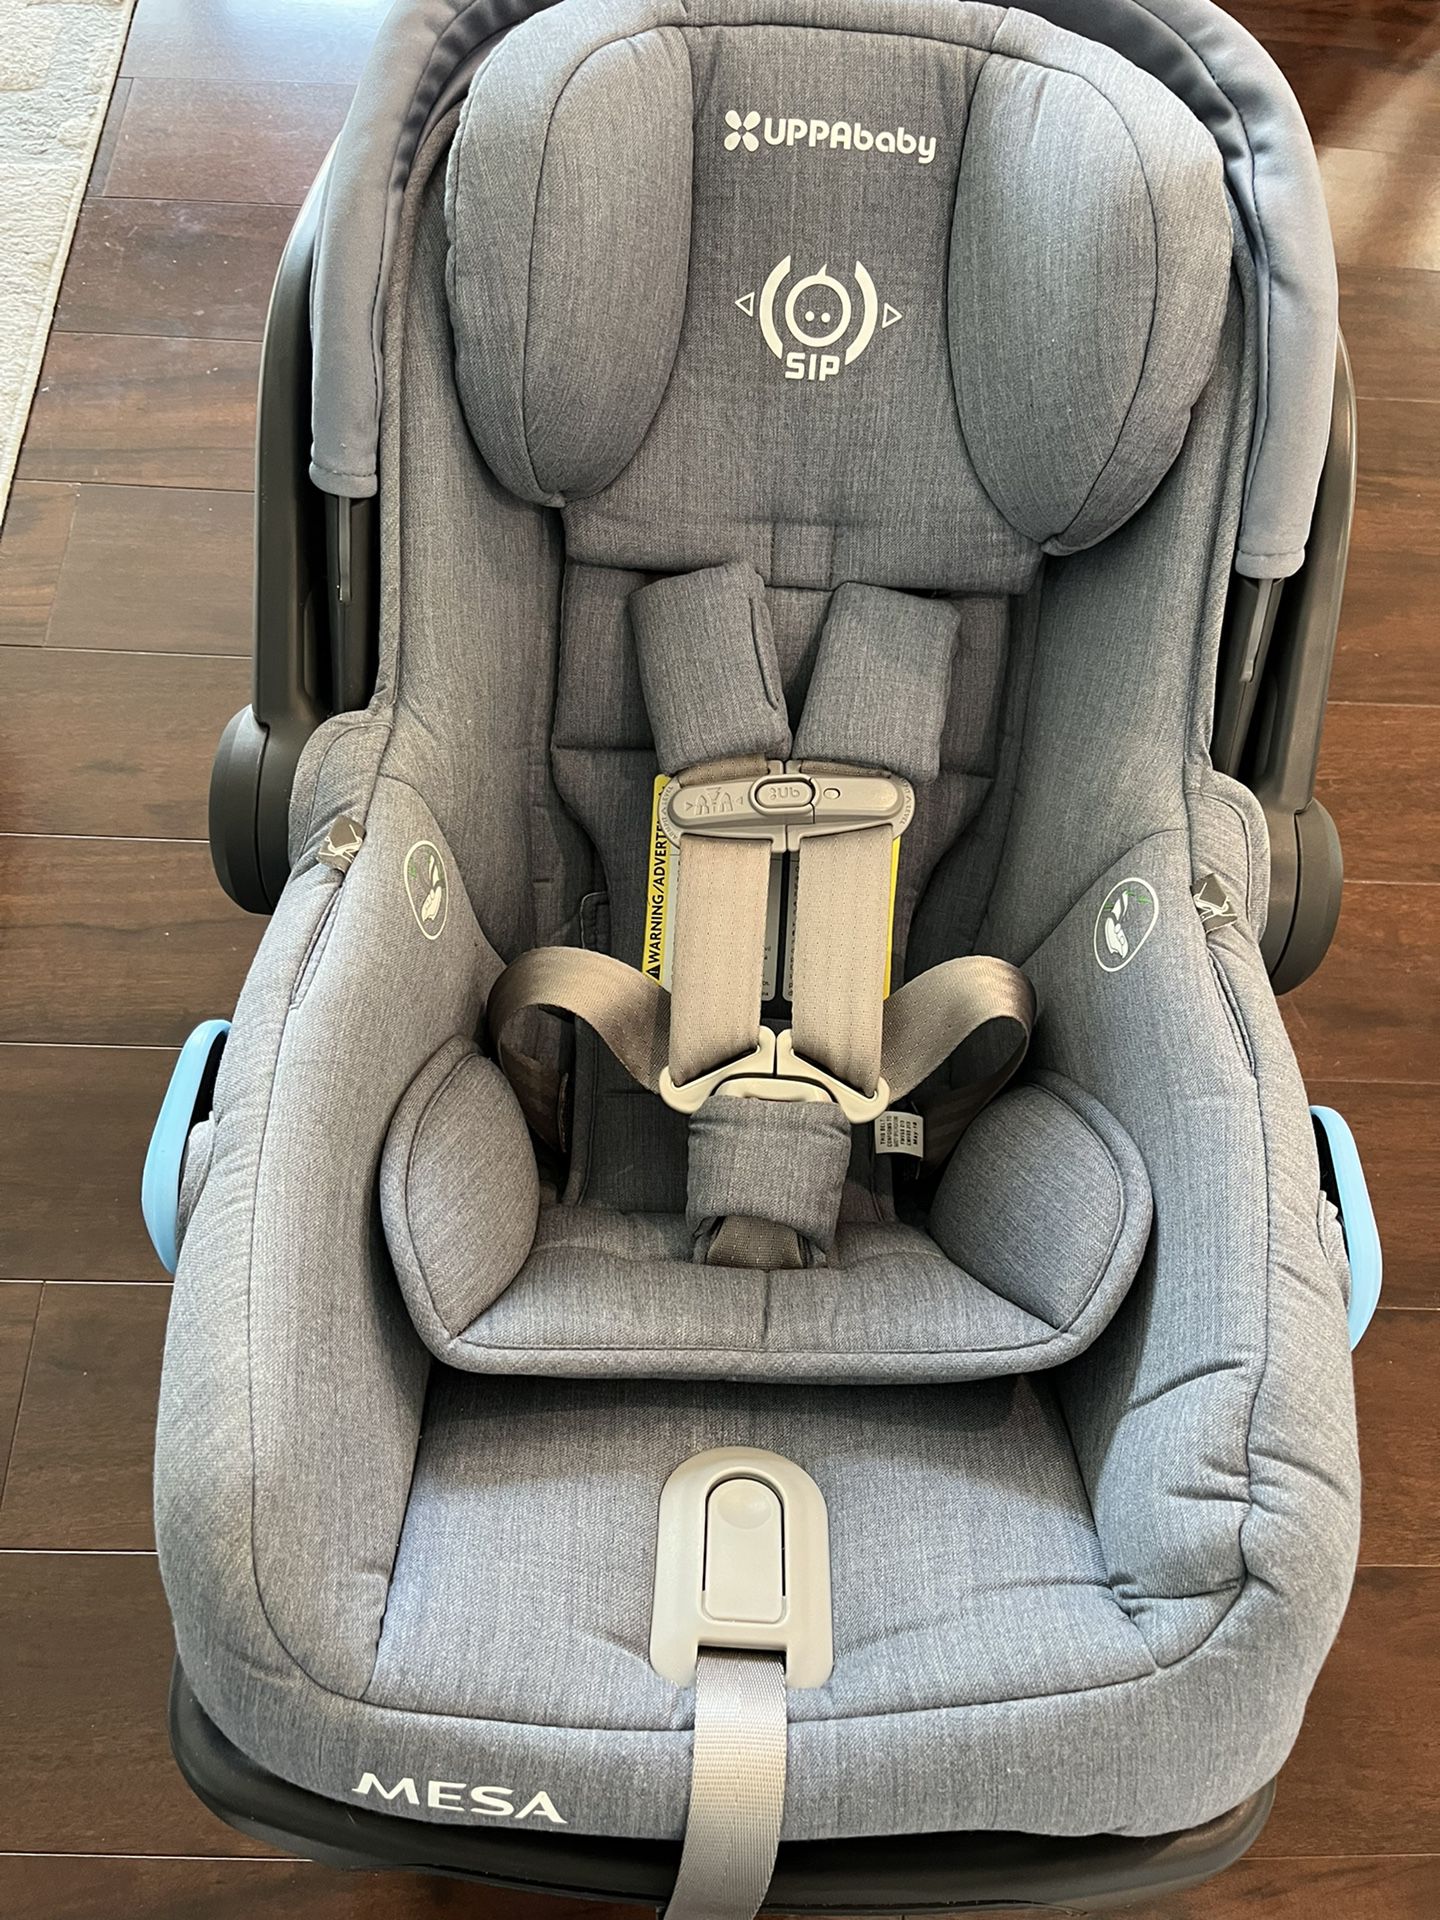 Uppababy Car Seat With Car Base Adapter For A 2nd Car And Snuggly Lining 